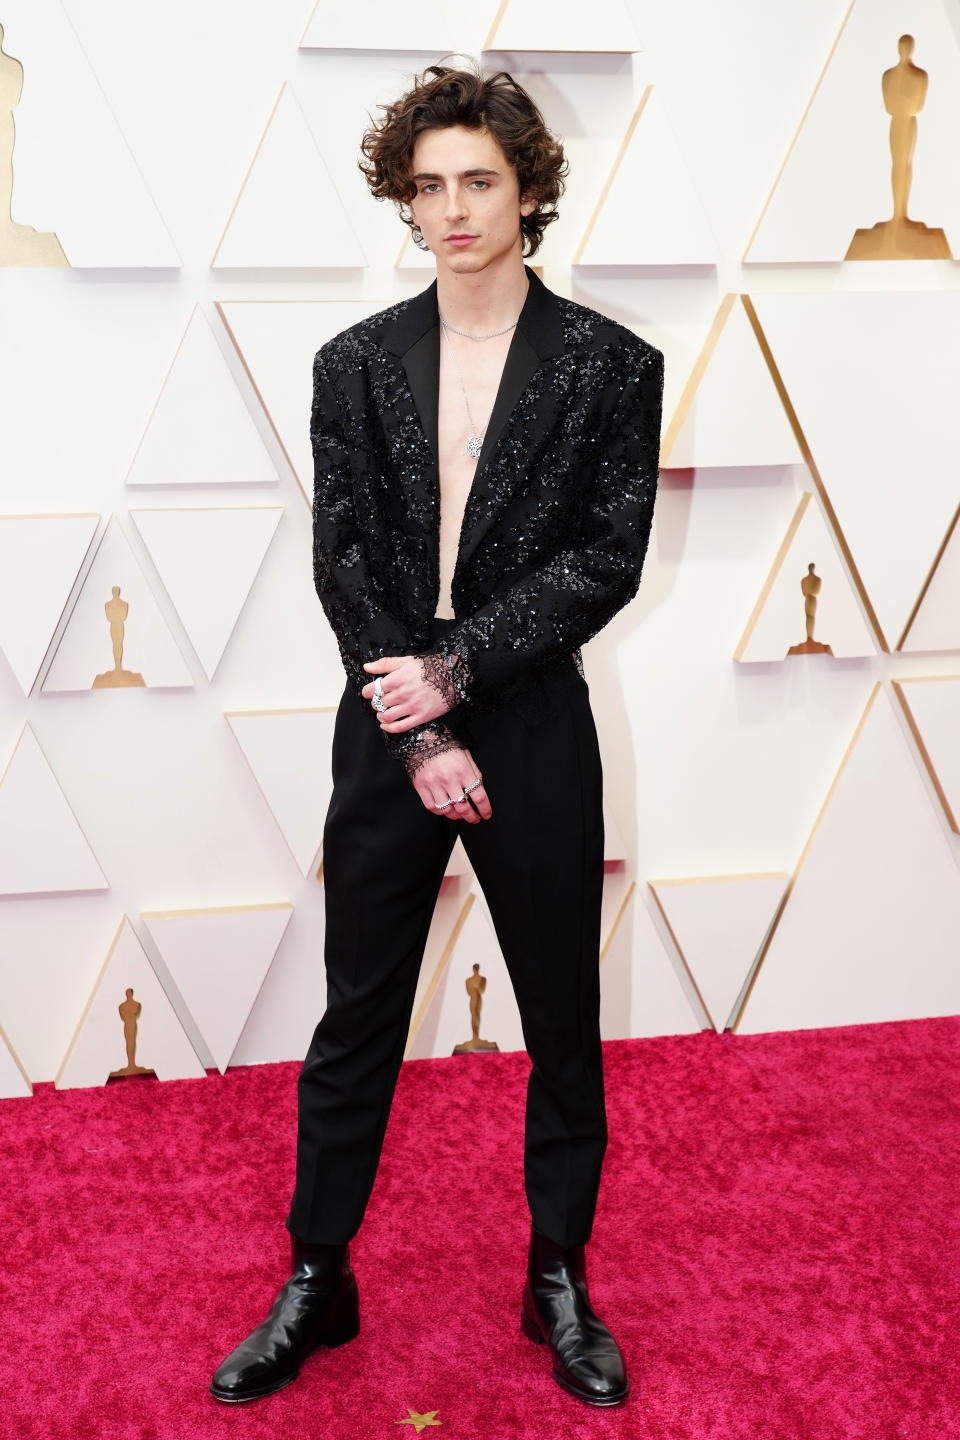 Timothée Chalamet on the 2022 Oscars red carpet. (Getty Images)